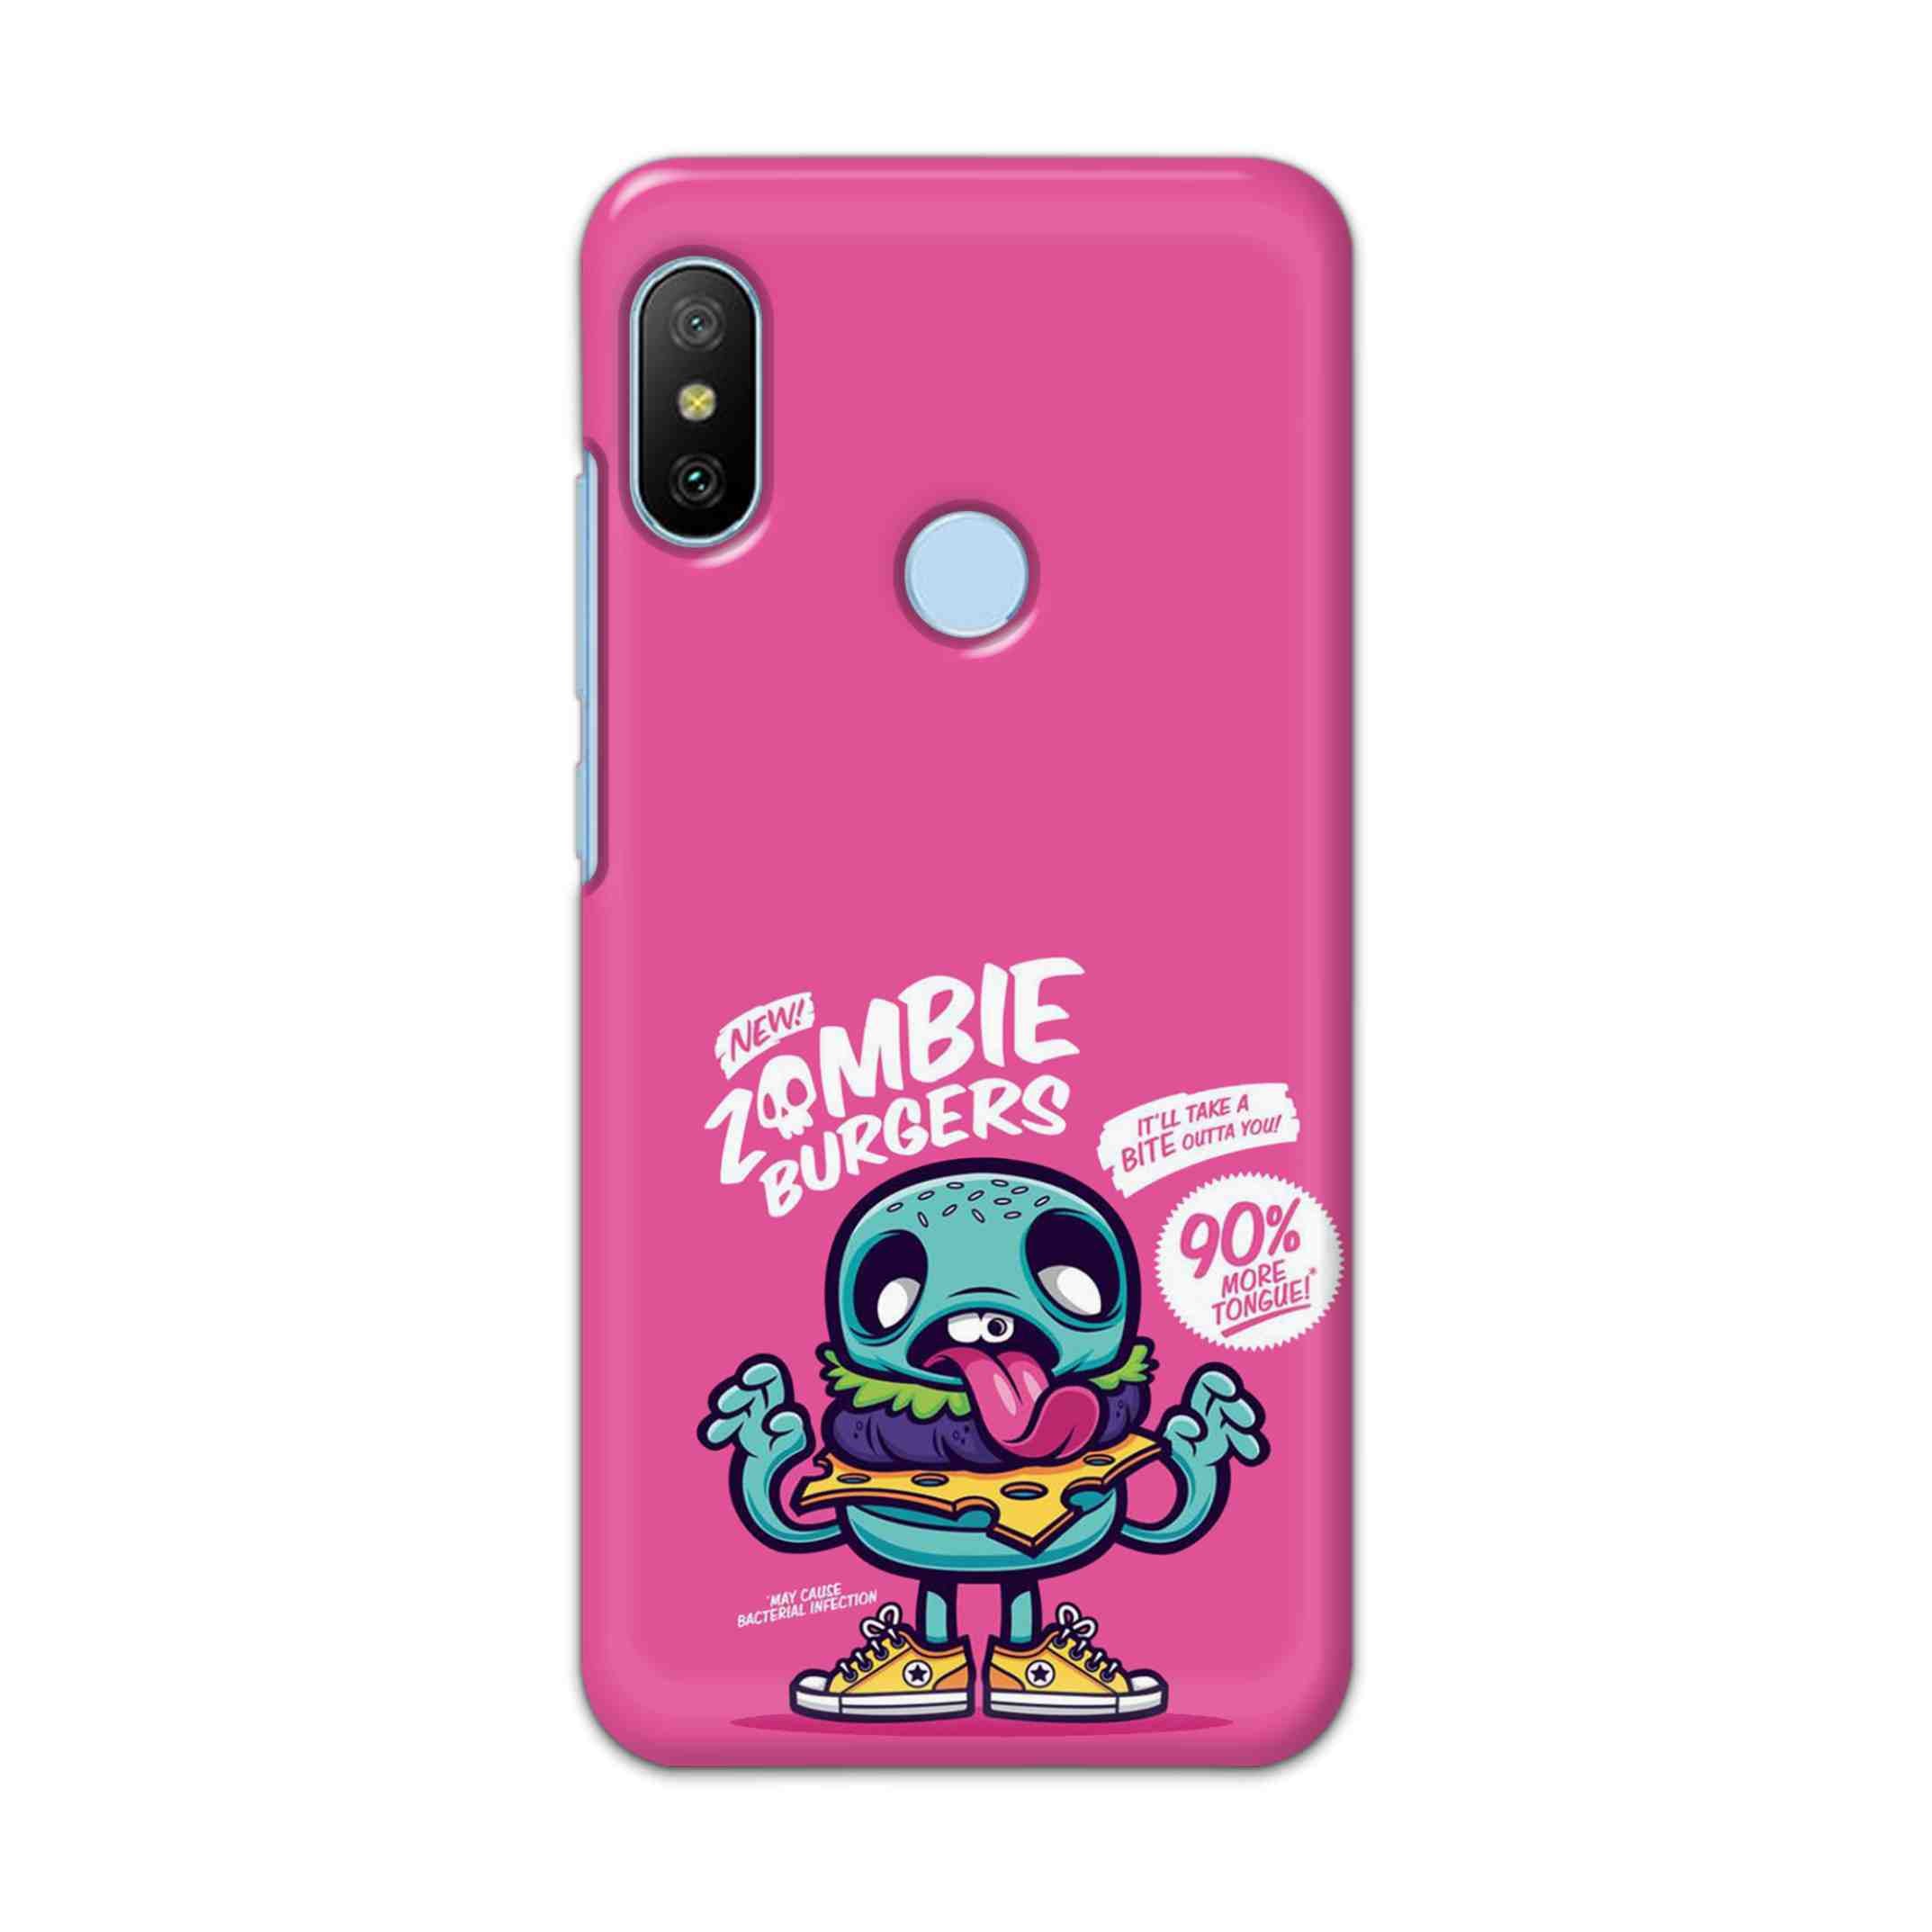 Buy New Zombie Burgers Hard Back Mobile Phone Case/Cover For Xiaomi Redmi 6 Pro Online